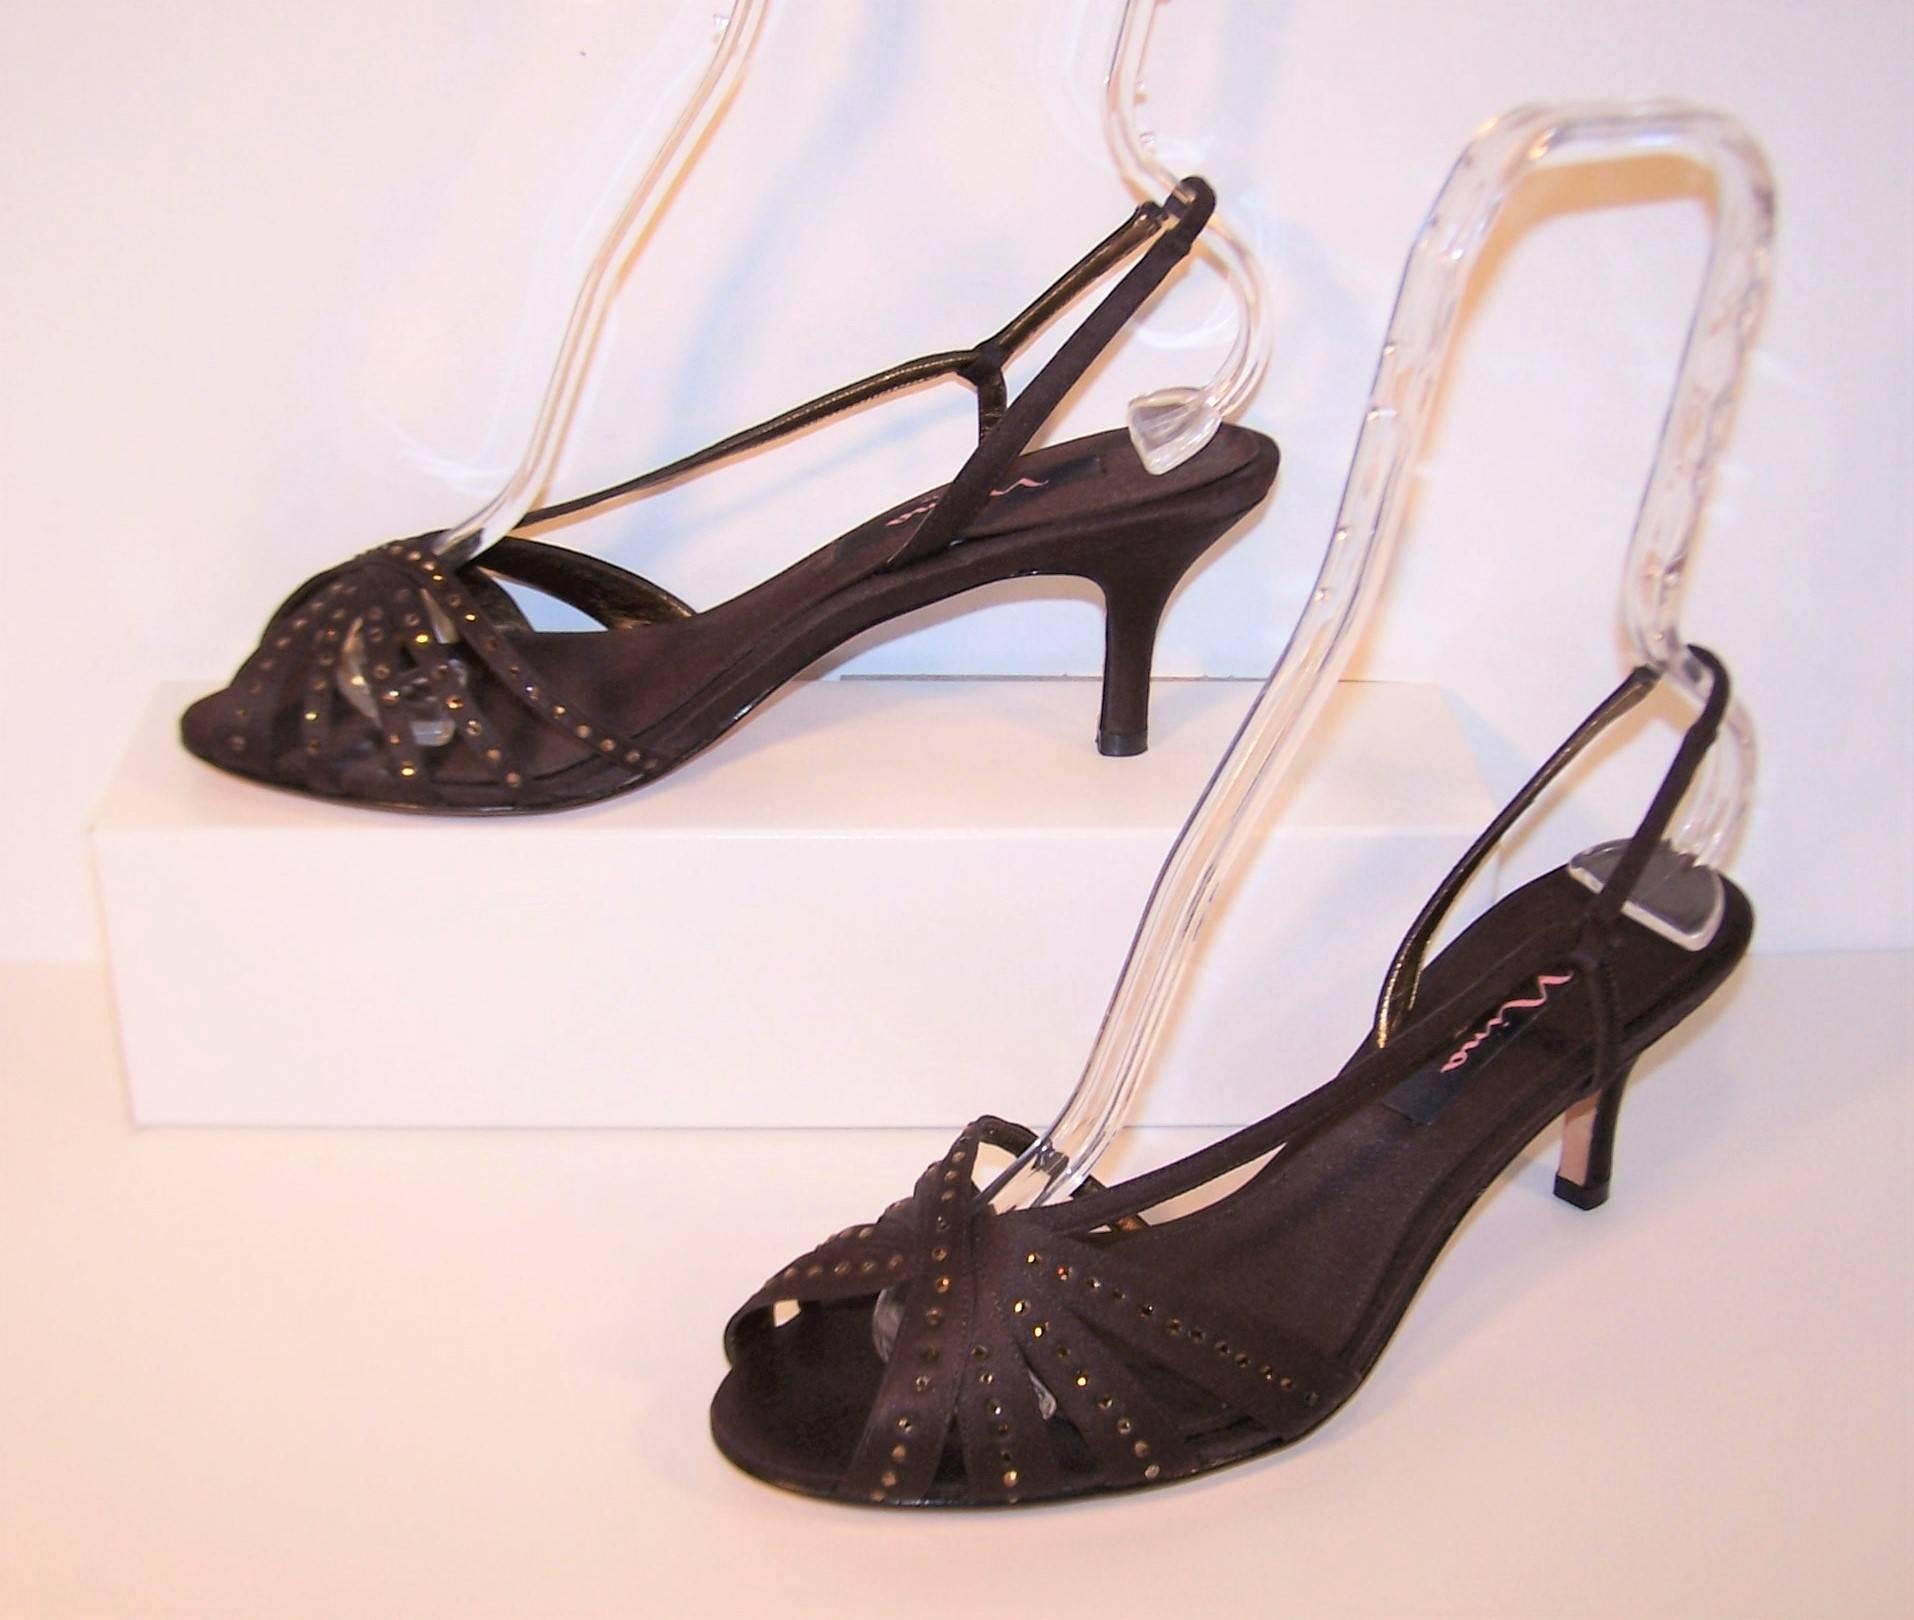 You can dance all night in these lovely chocolate brown satin fabric sandals by Nina of New York.  The elasticized slingback and modest 3" heel are reminiscent of 1950's styles.  The addition of coppery pave crystal embellishment on the